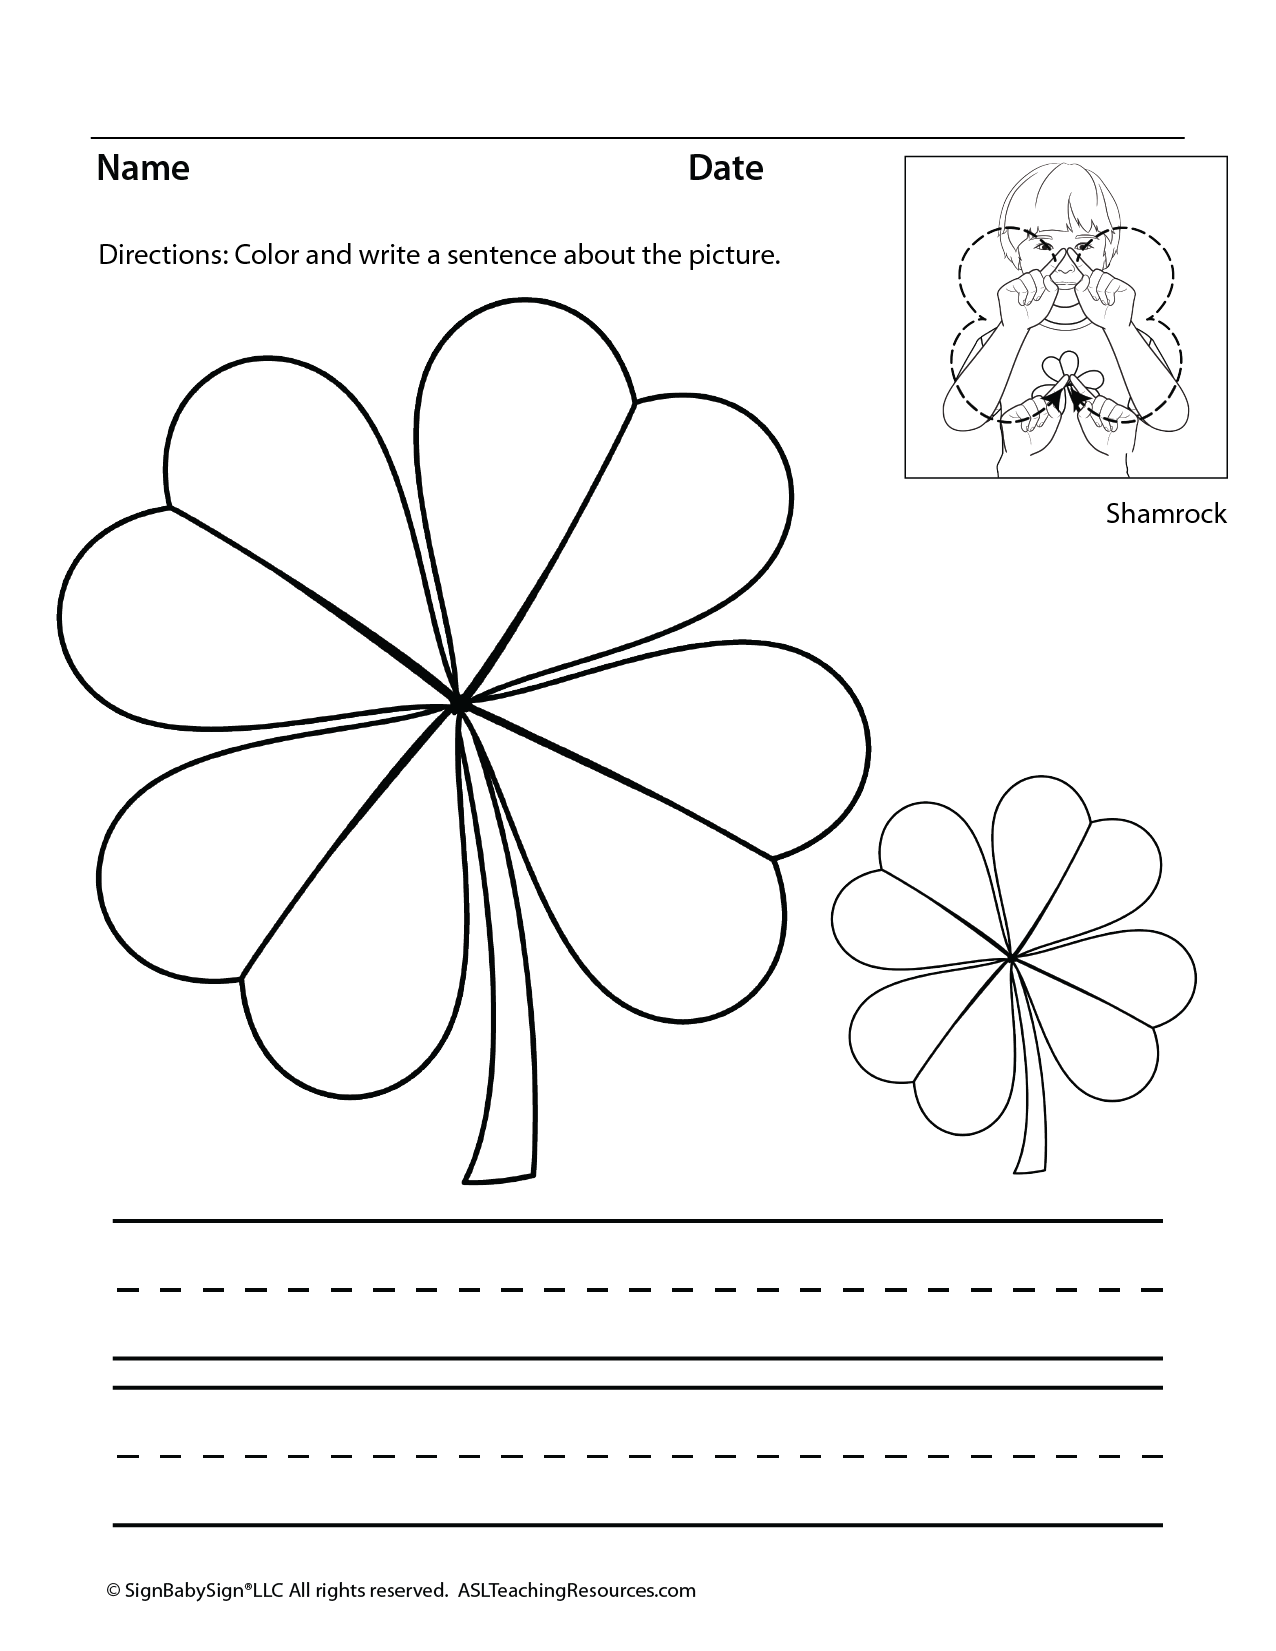 st-patrick-s-day-coloring-page-asl-teaching-resources-coloring-home